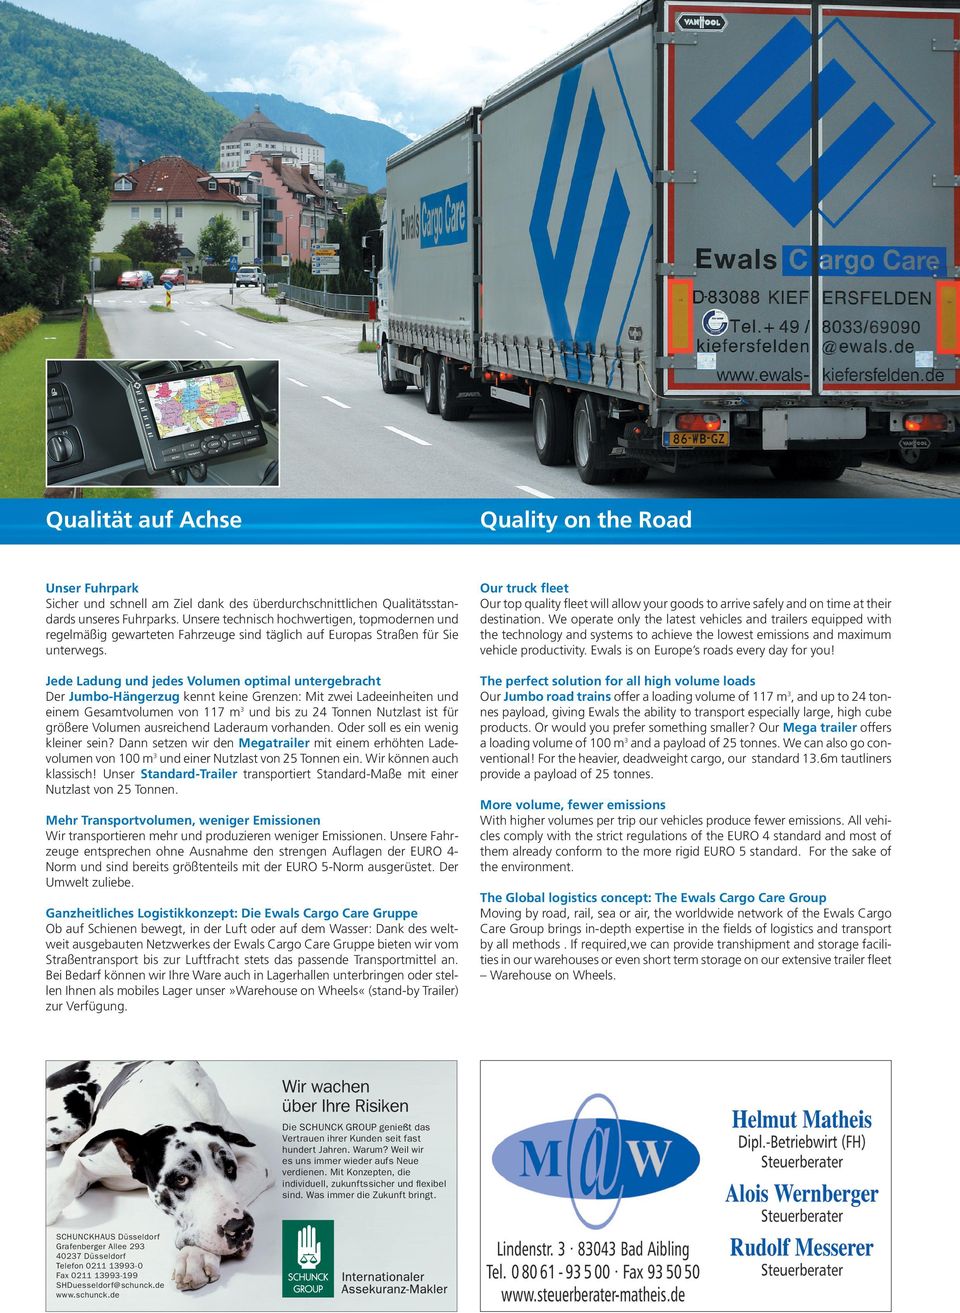 Our truck fleet Our top quality fleet will allow your goods to arrive safely and on time at their destination.